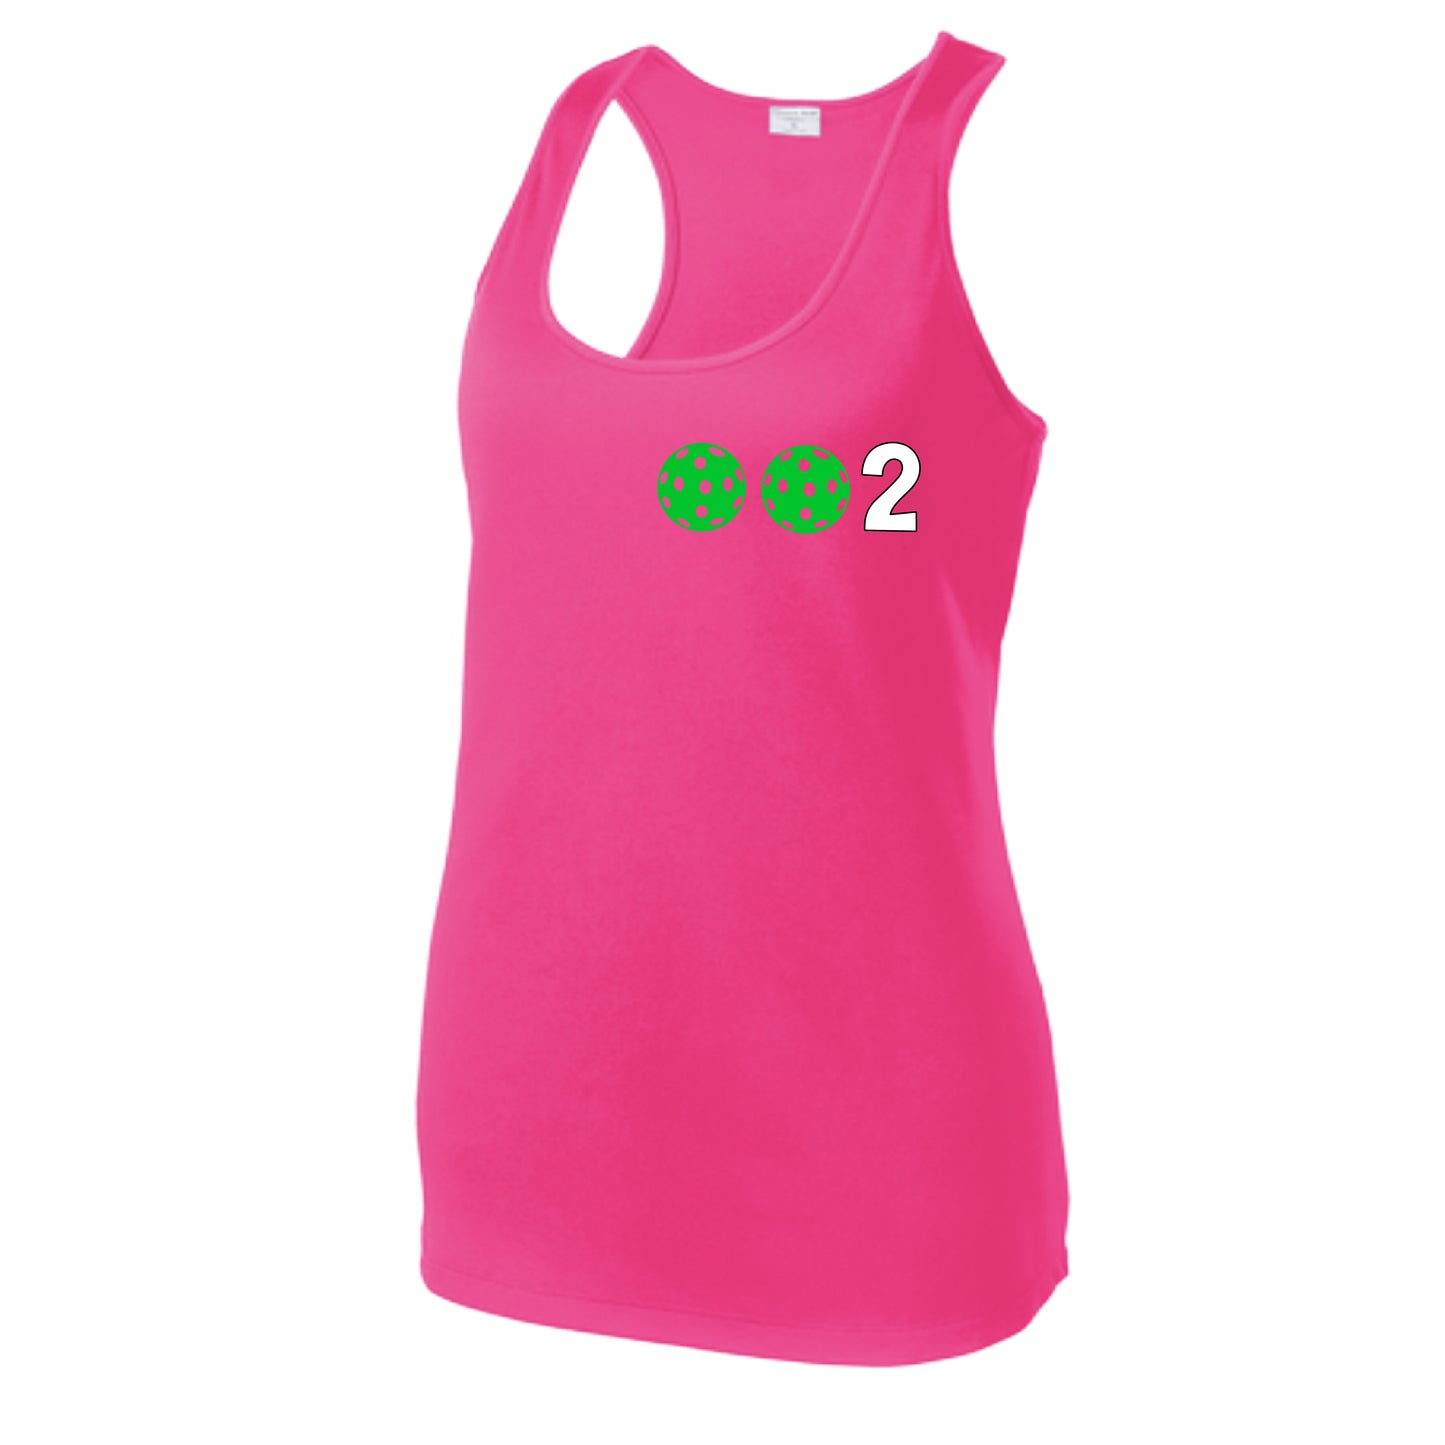 002 With Pickleballs (Colors Green Orange Red) Customizable | Women’s Racerback Tank | 100% Polyester